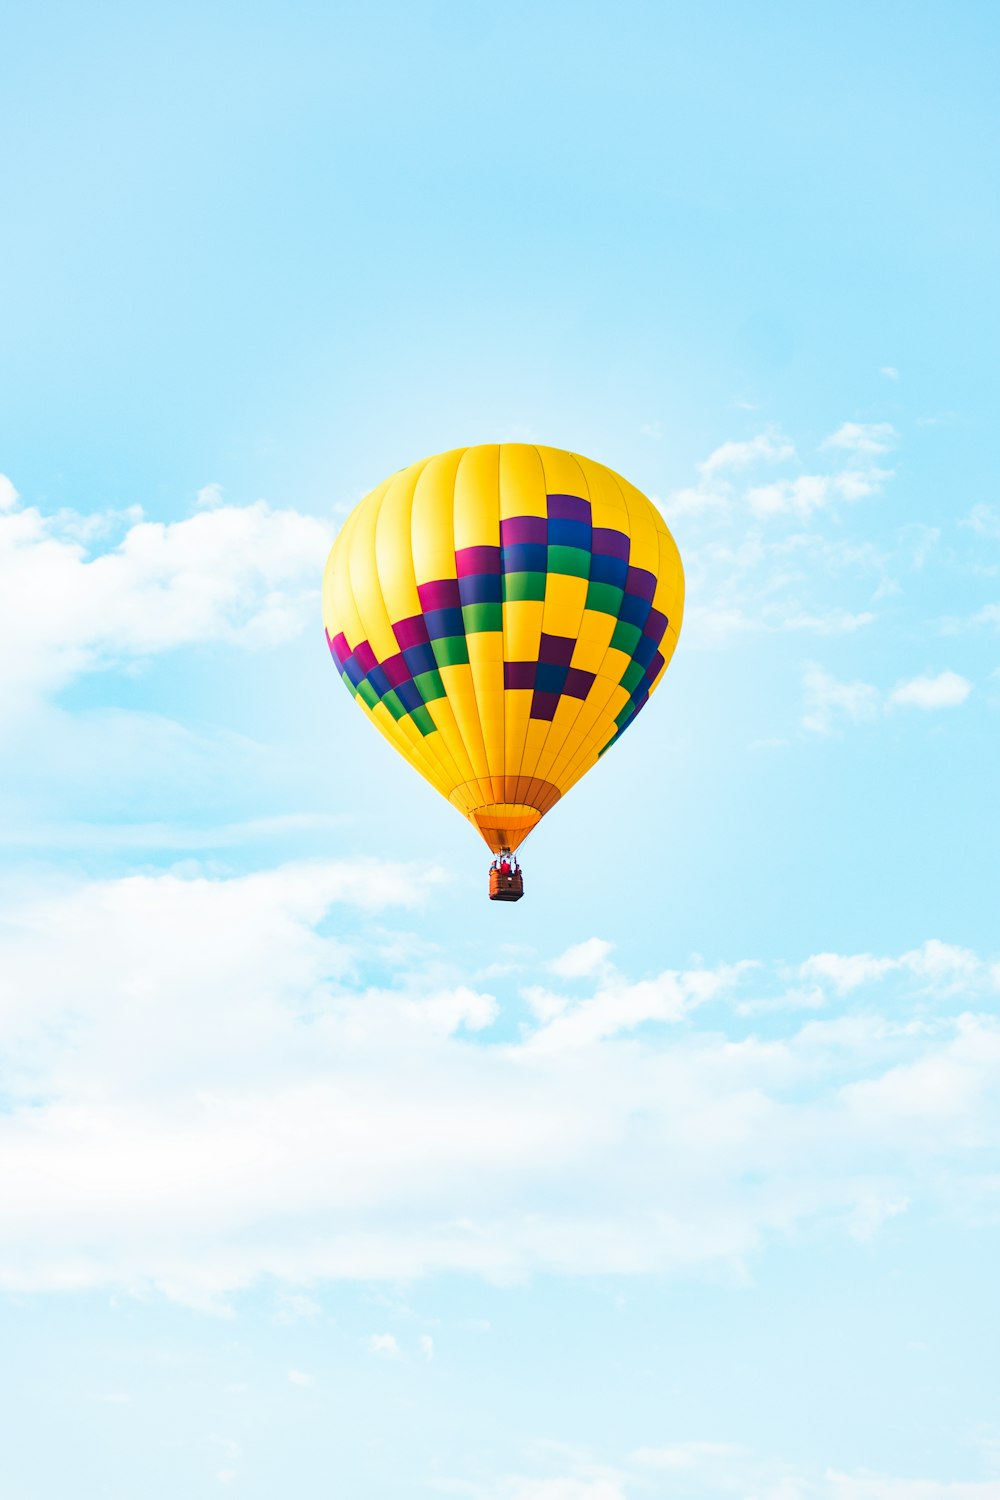 yellow blue and red hot air balloon in mid air under blue sky during daytime